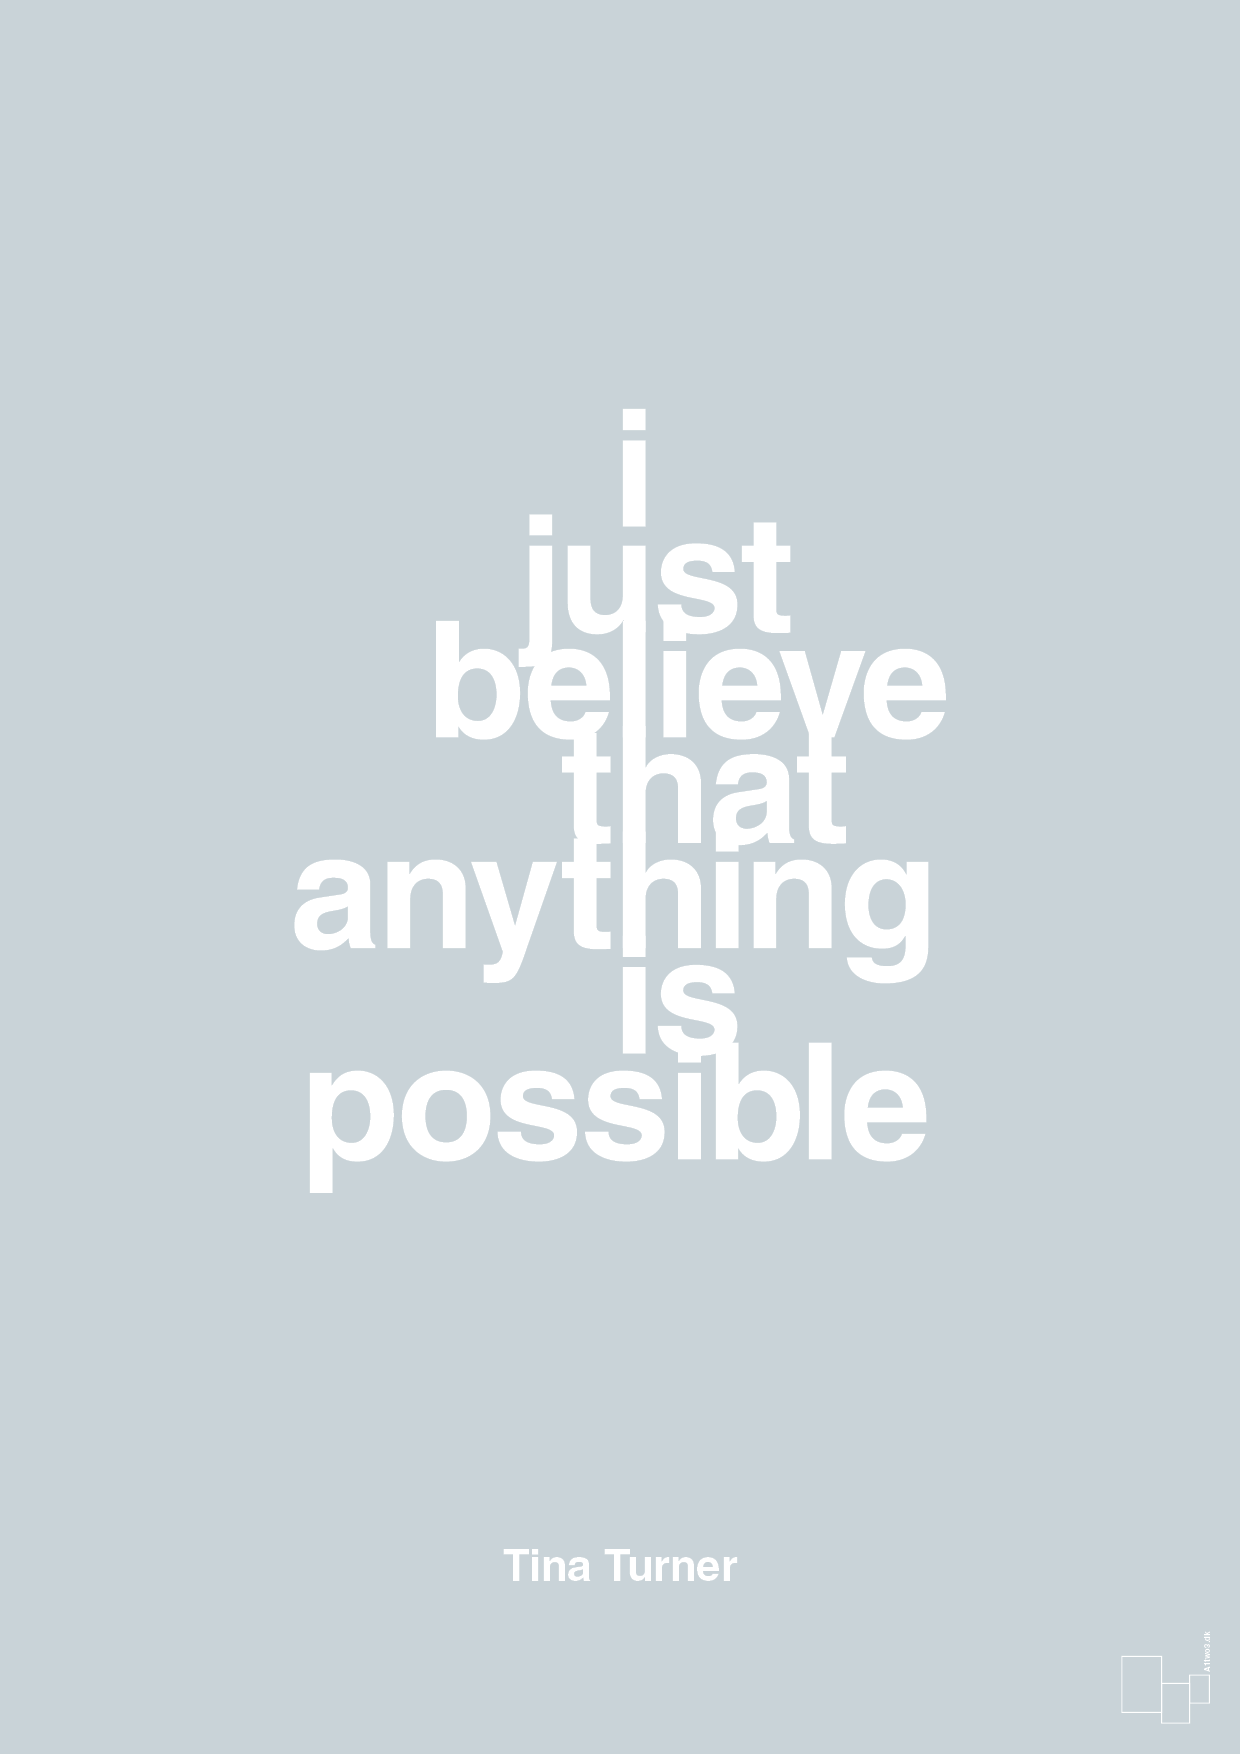 i just believe that anything is possible - Plakat med Citater i Light Drizzle